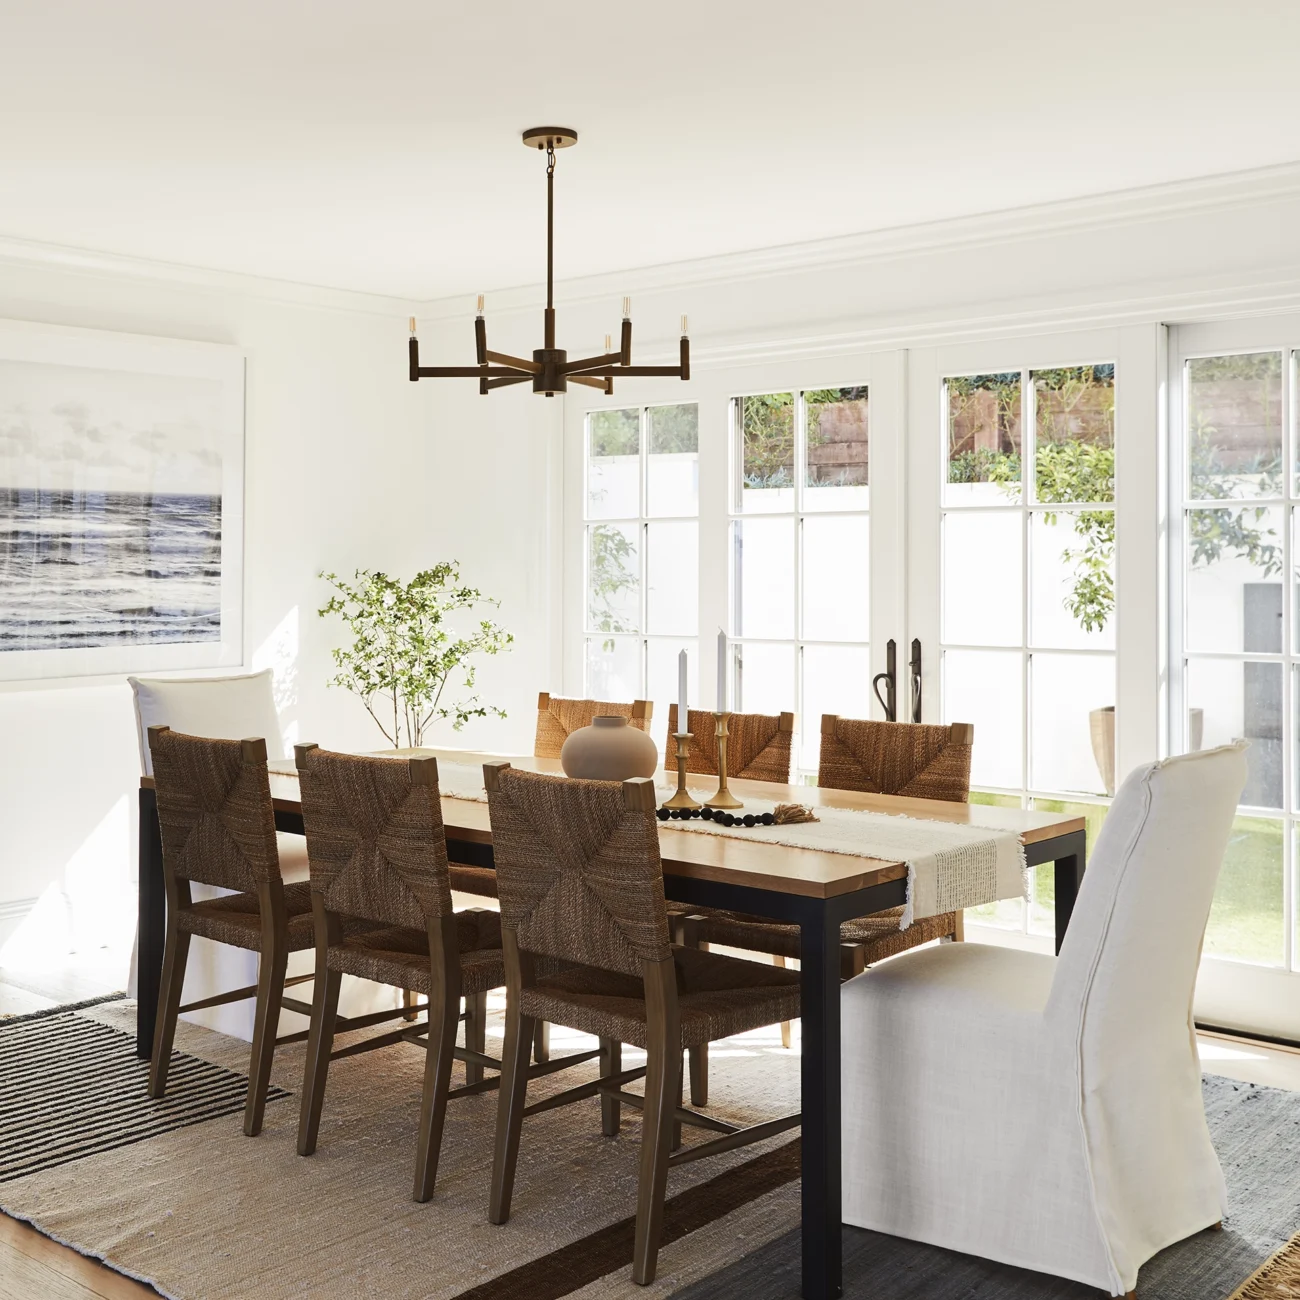 Christine Vroom Interiors | Via Almar | Costal dining room with floor to ceiling windows and doors